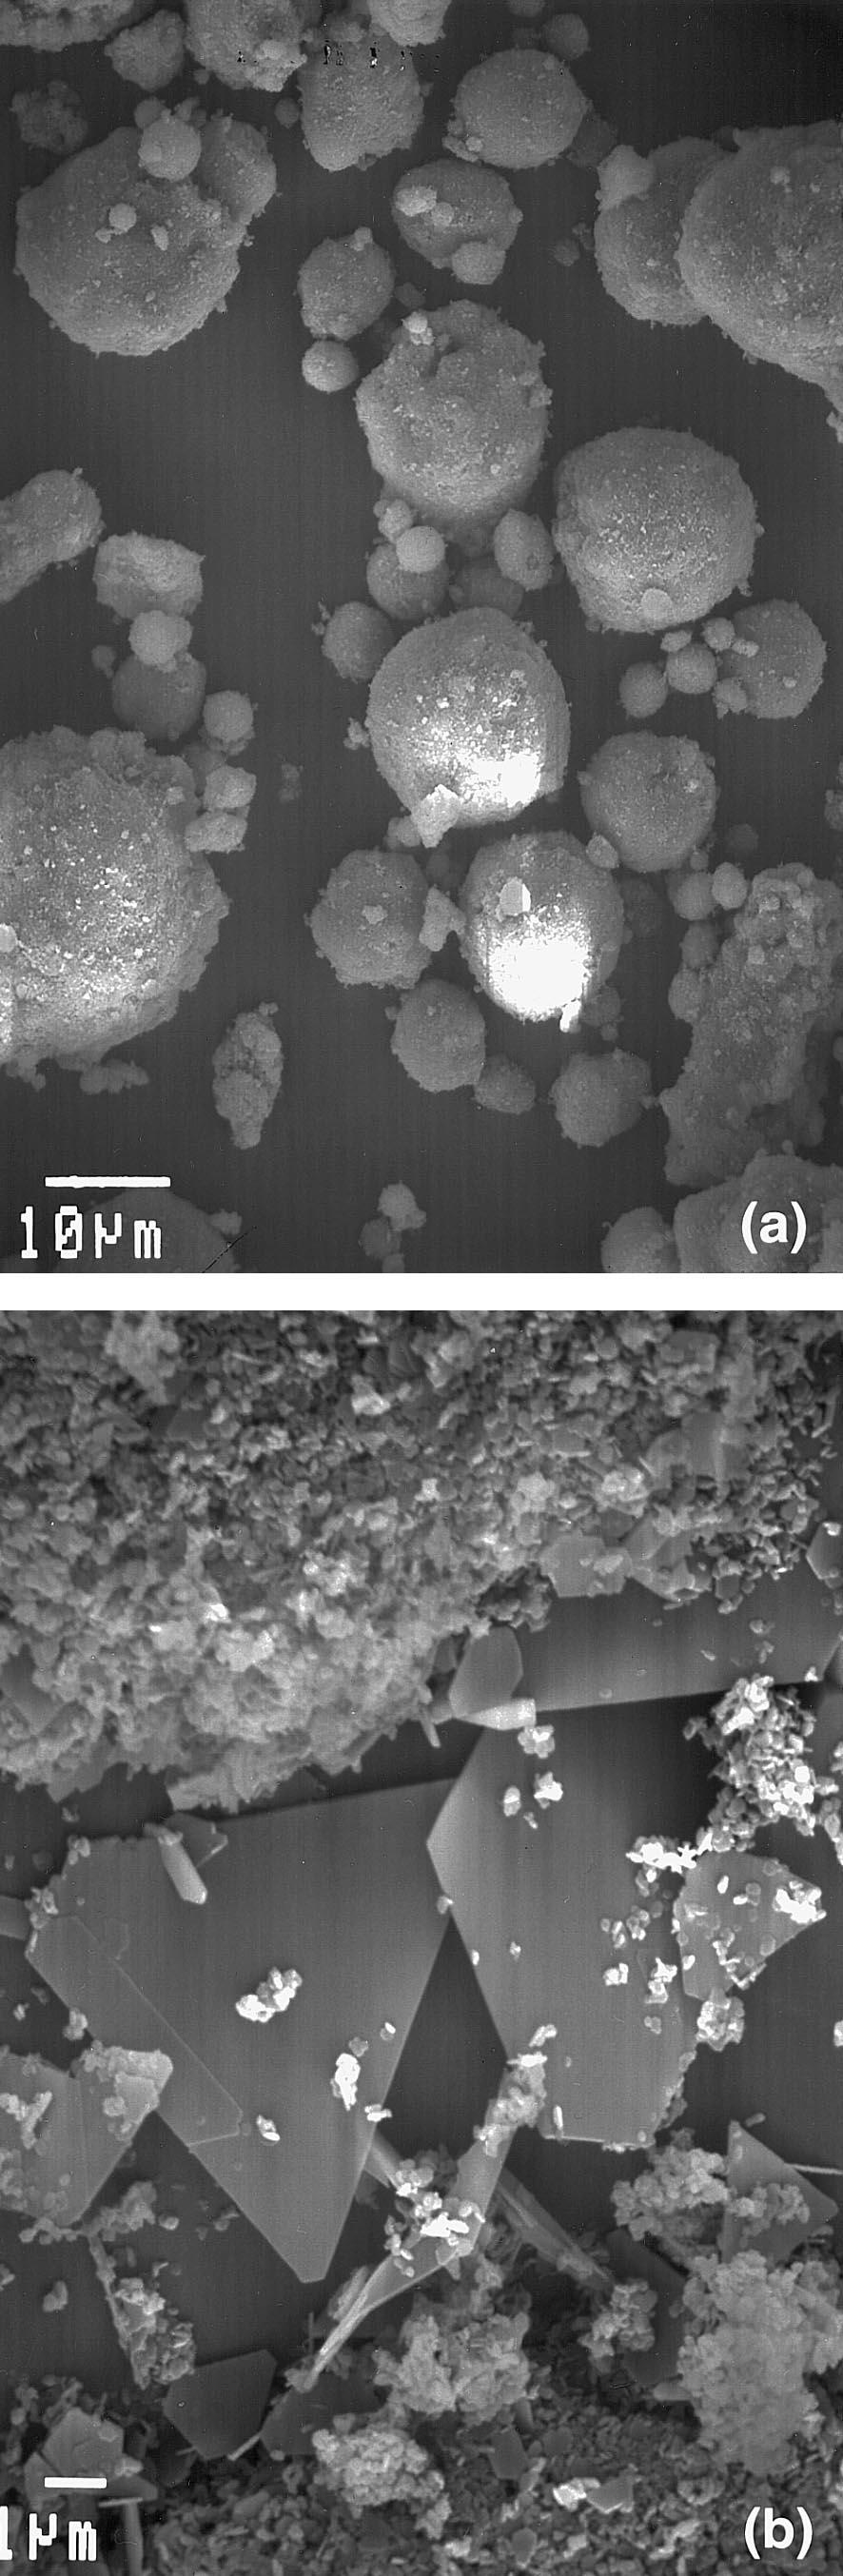 488 P. J. Saccocia, J. S. Seewald, and W. C. Shanks III erned primarily by dissolution-recrystallization, rather than volume diffusion.